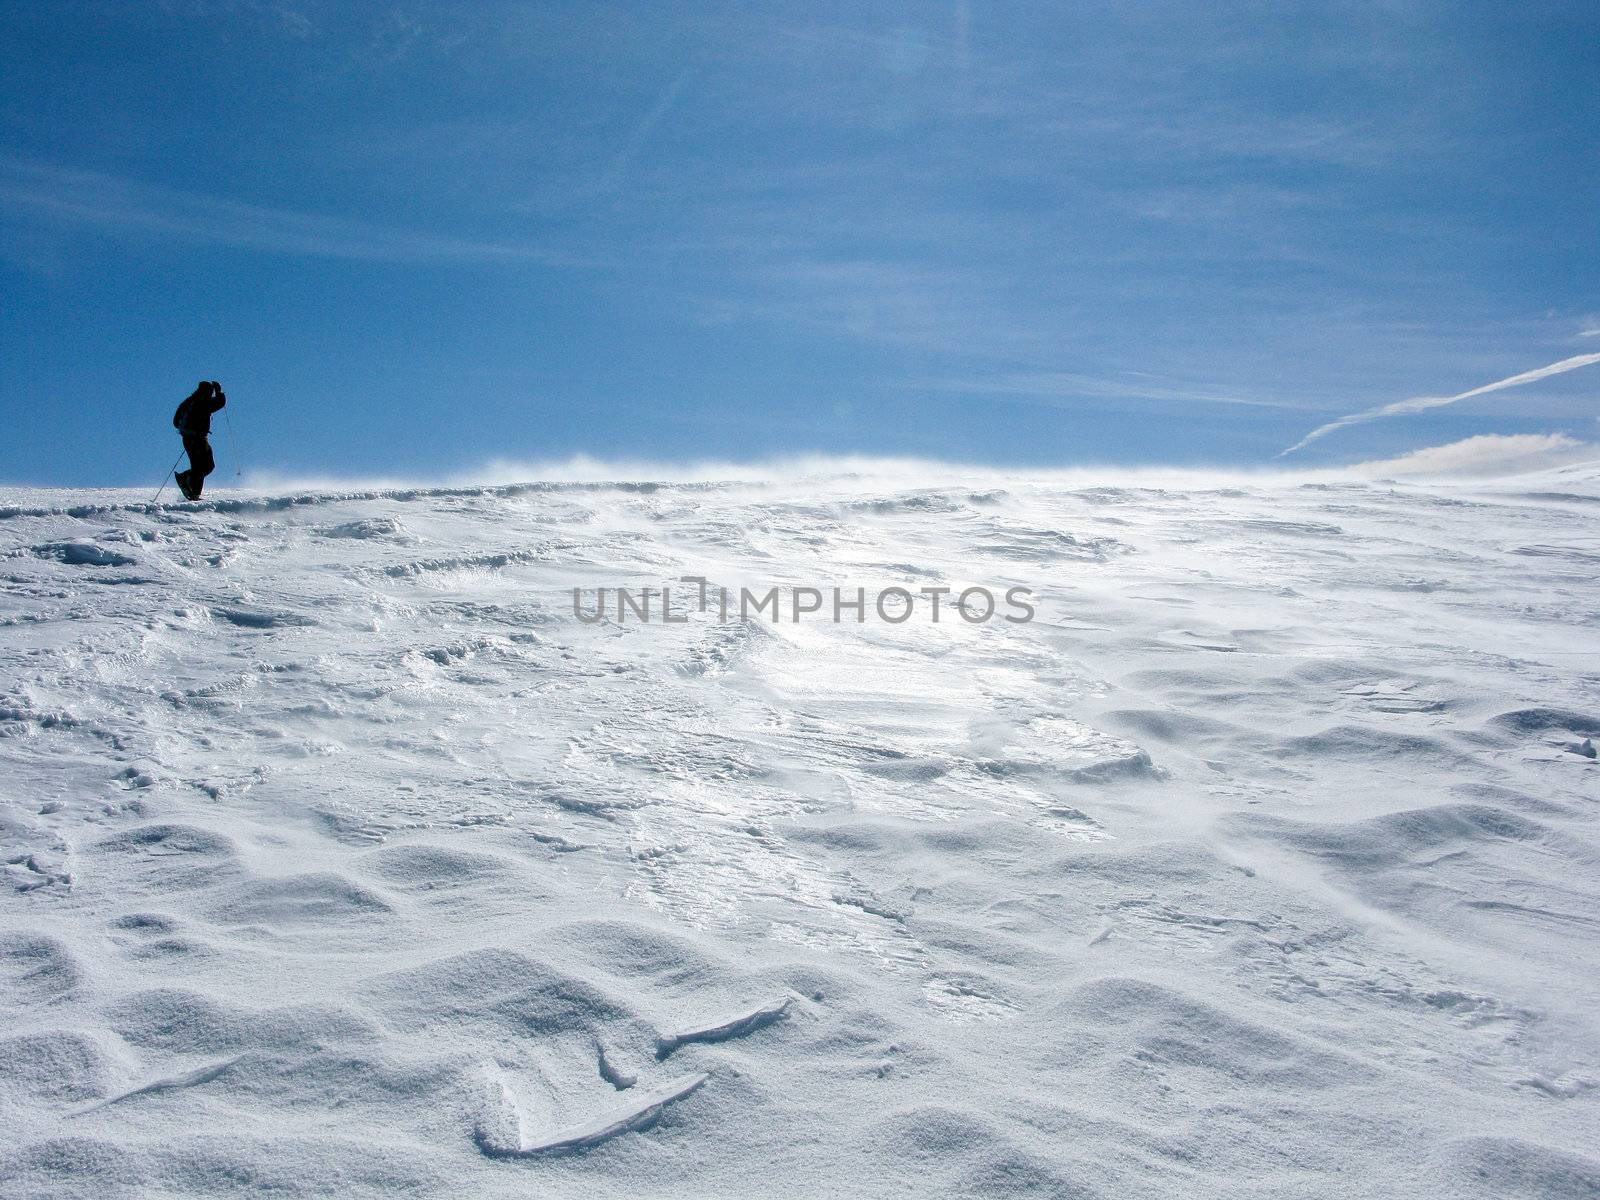 Snowy mountains in the pyrenees, Spain. with lonely hiking person